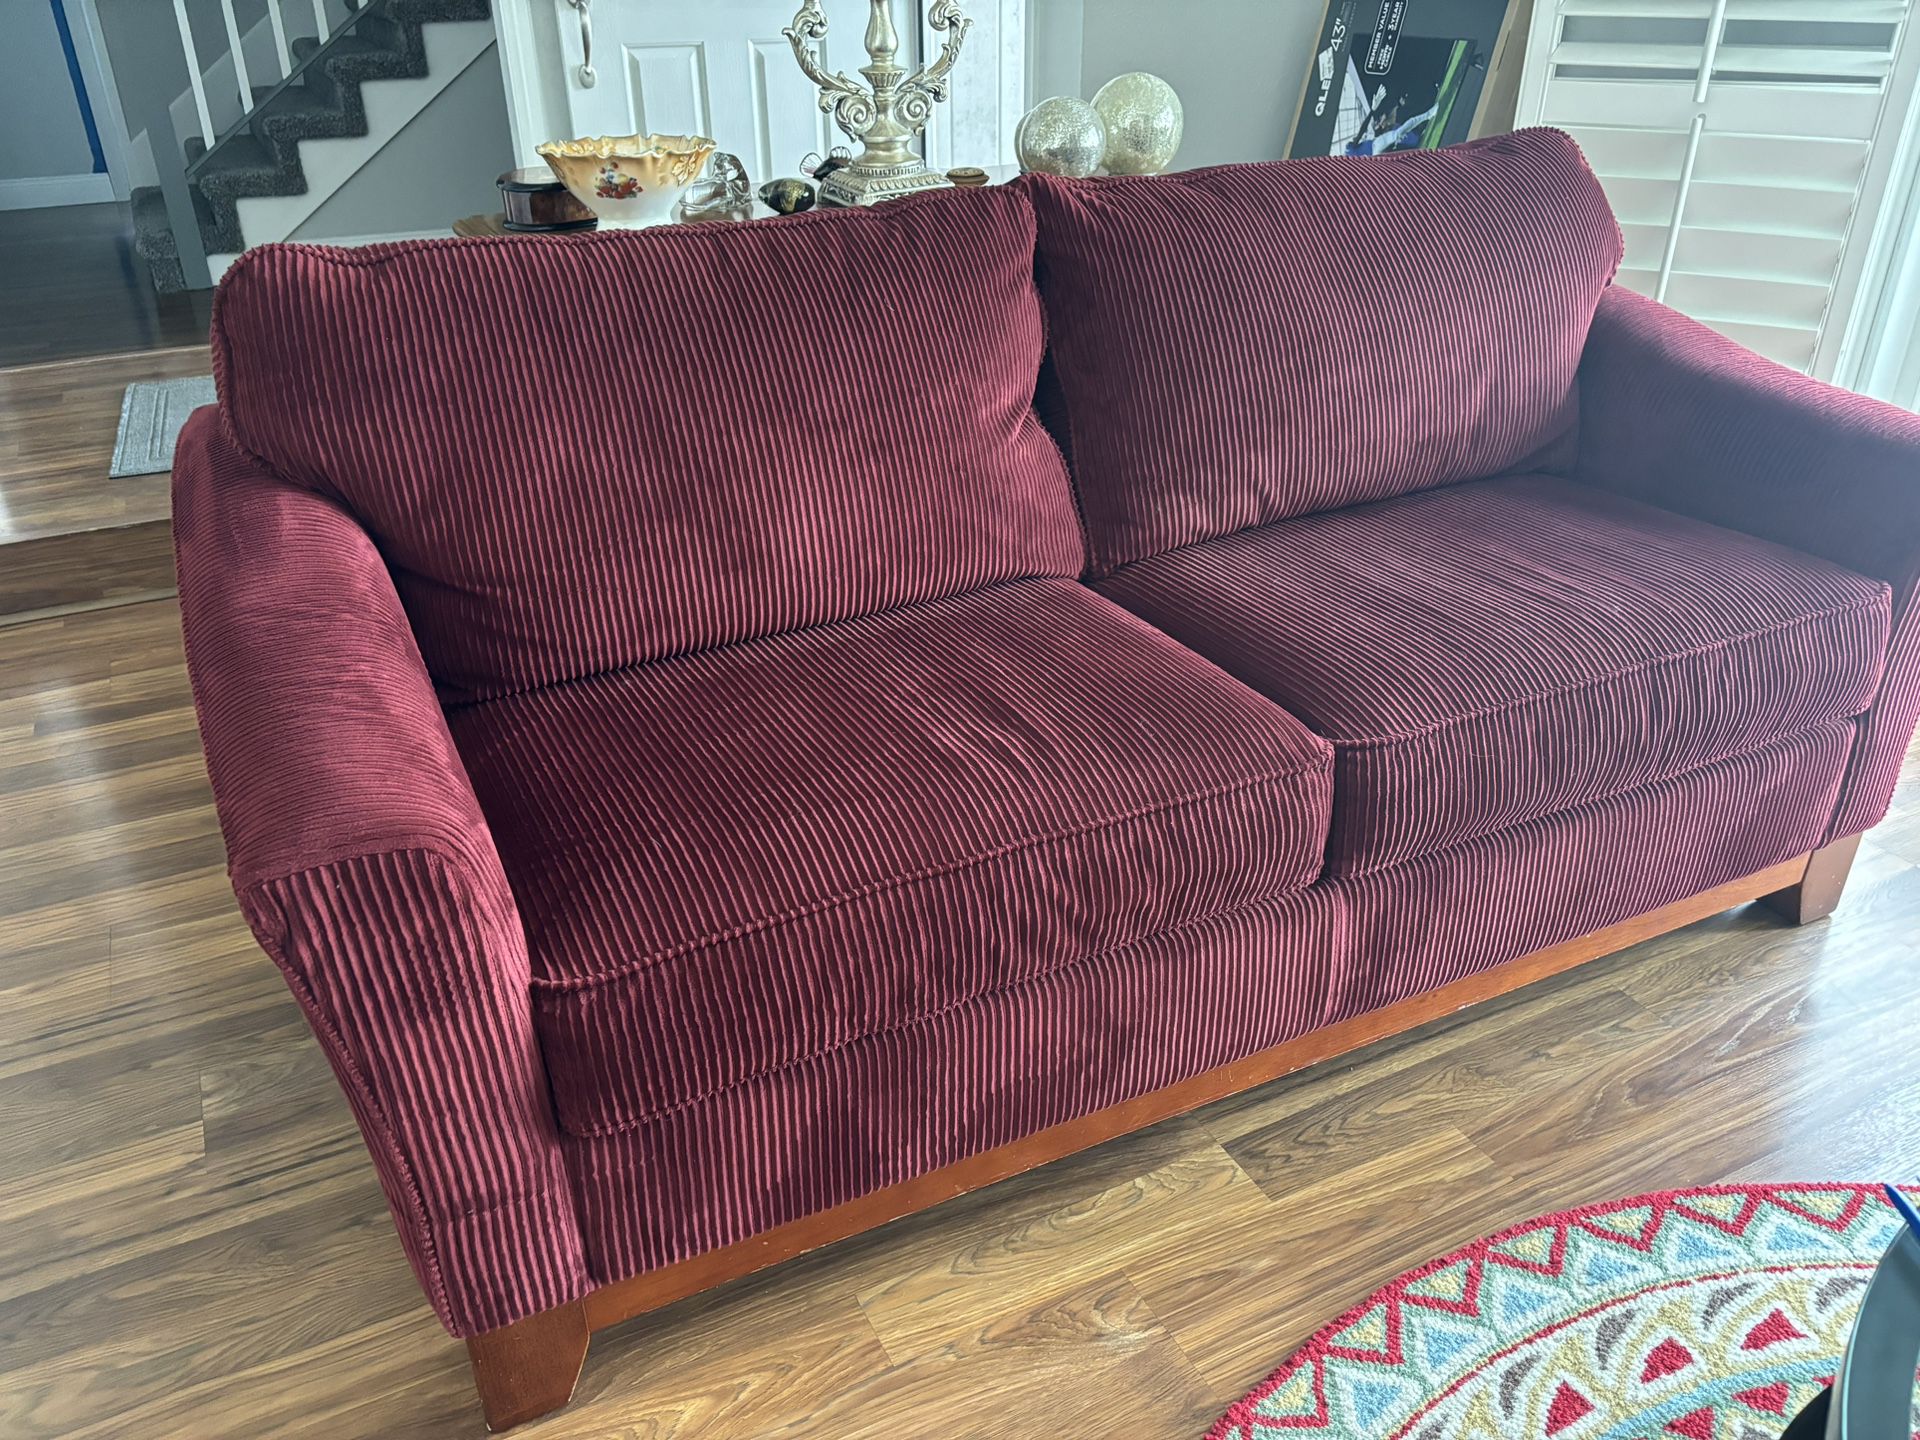 Red corduroy couch